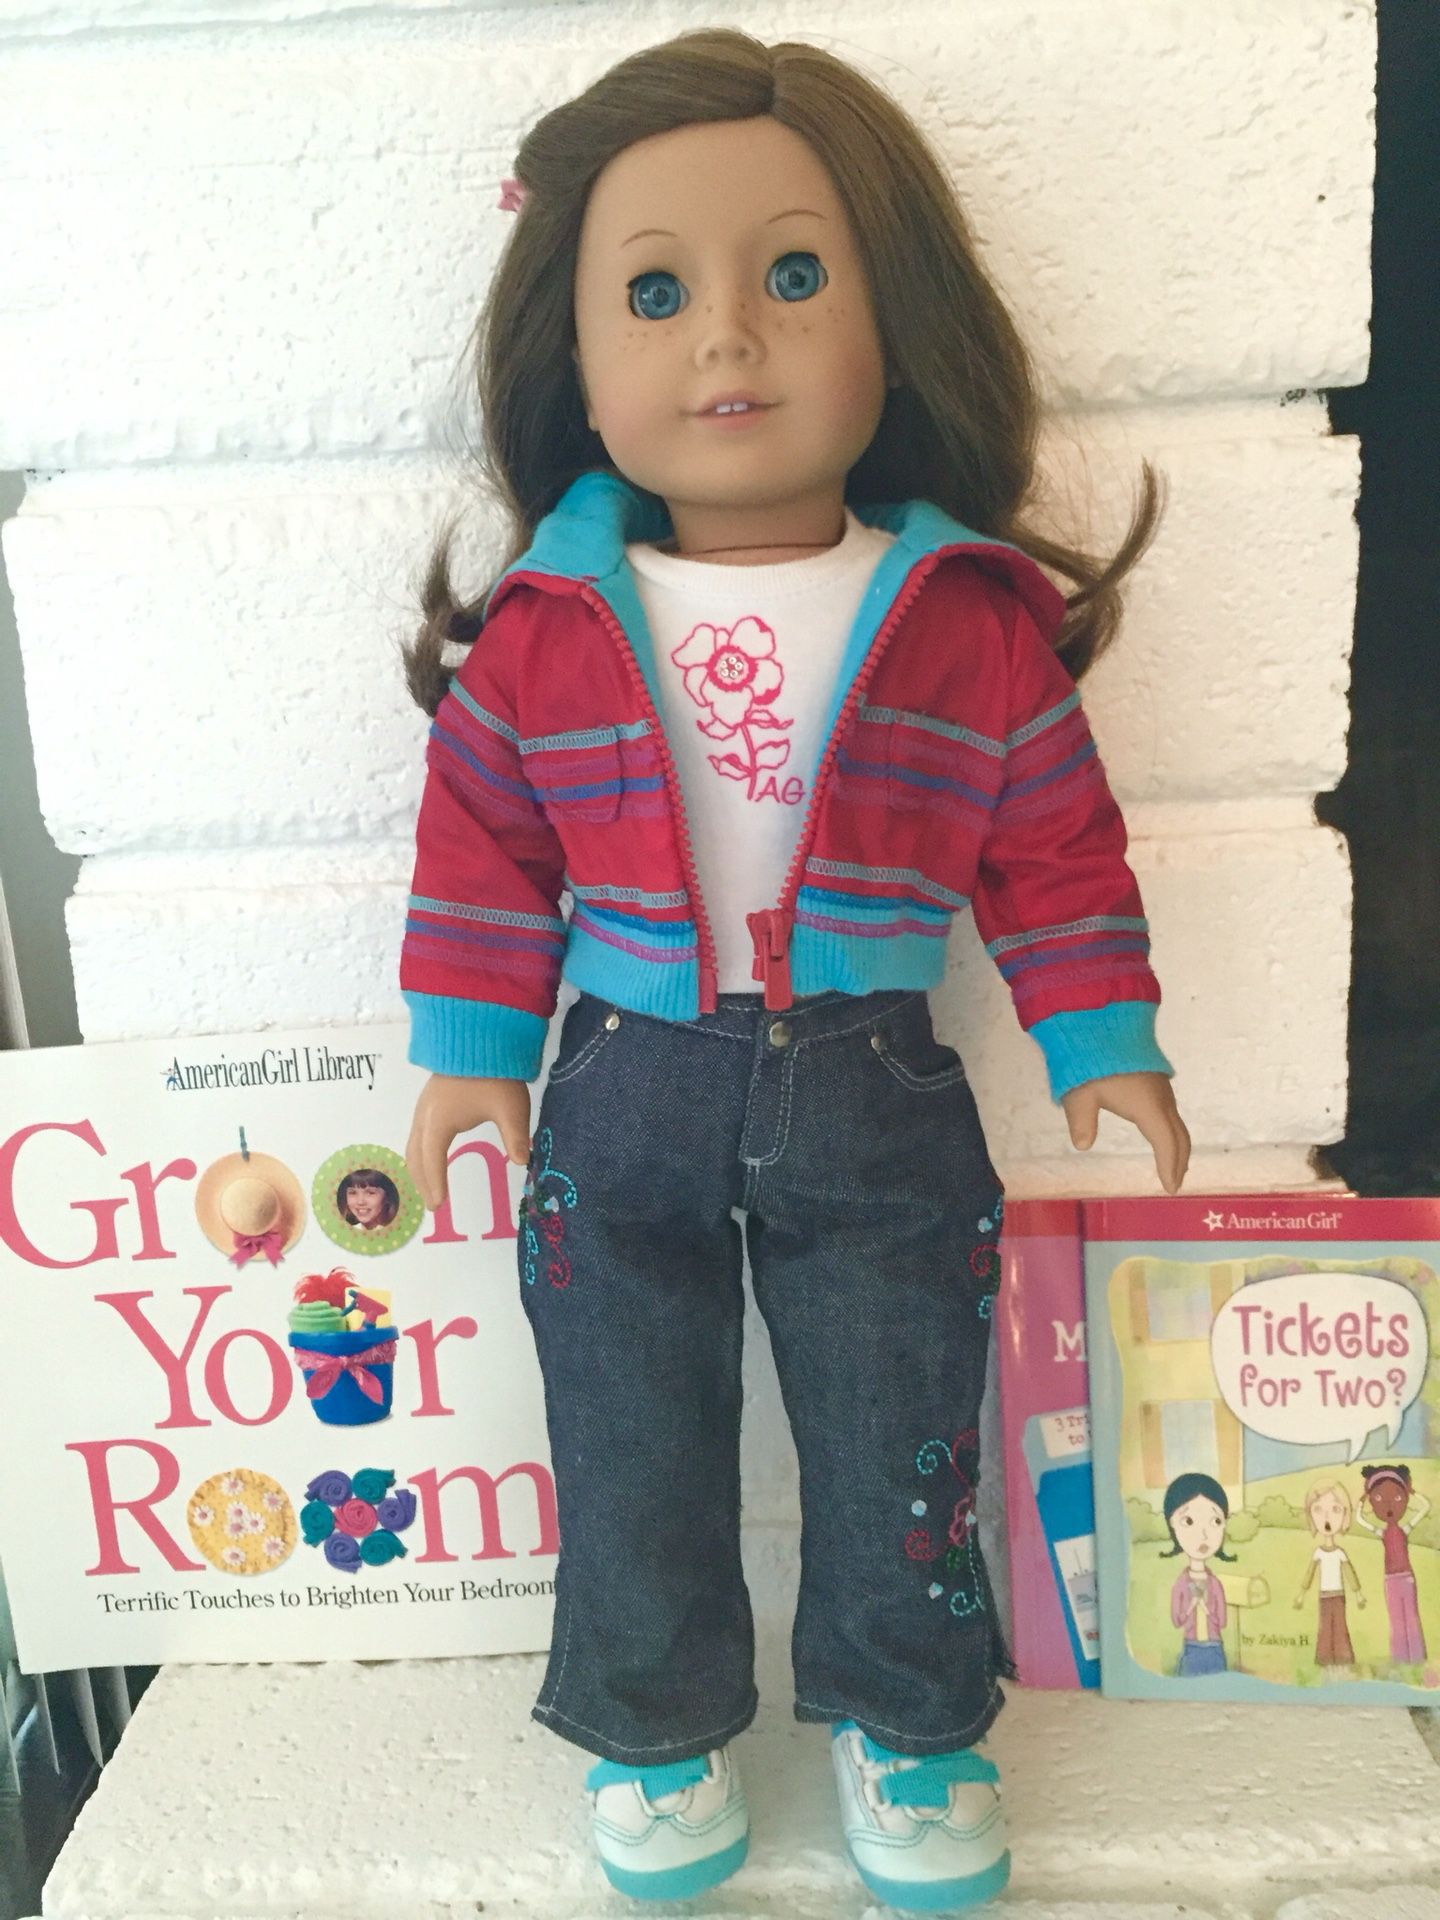 American Girl Doll and books